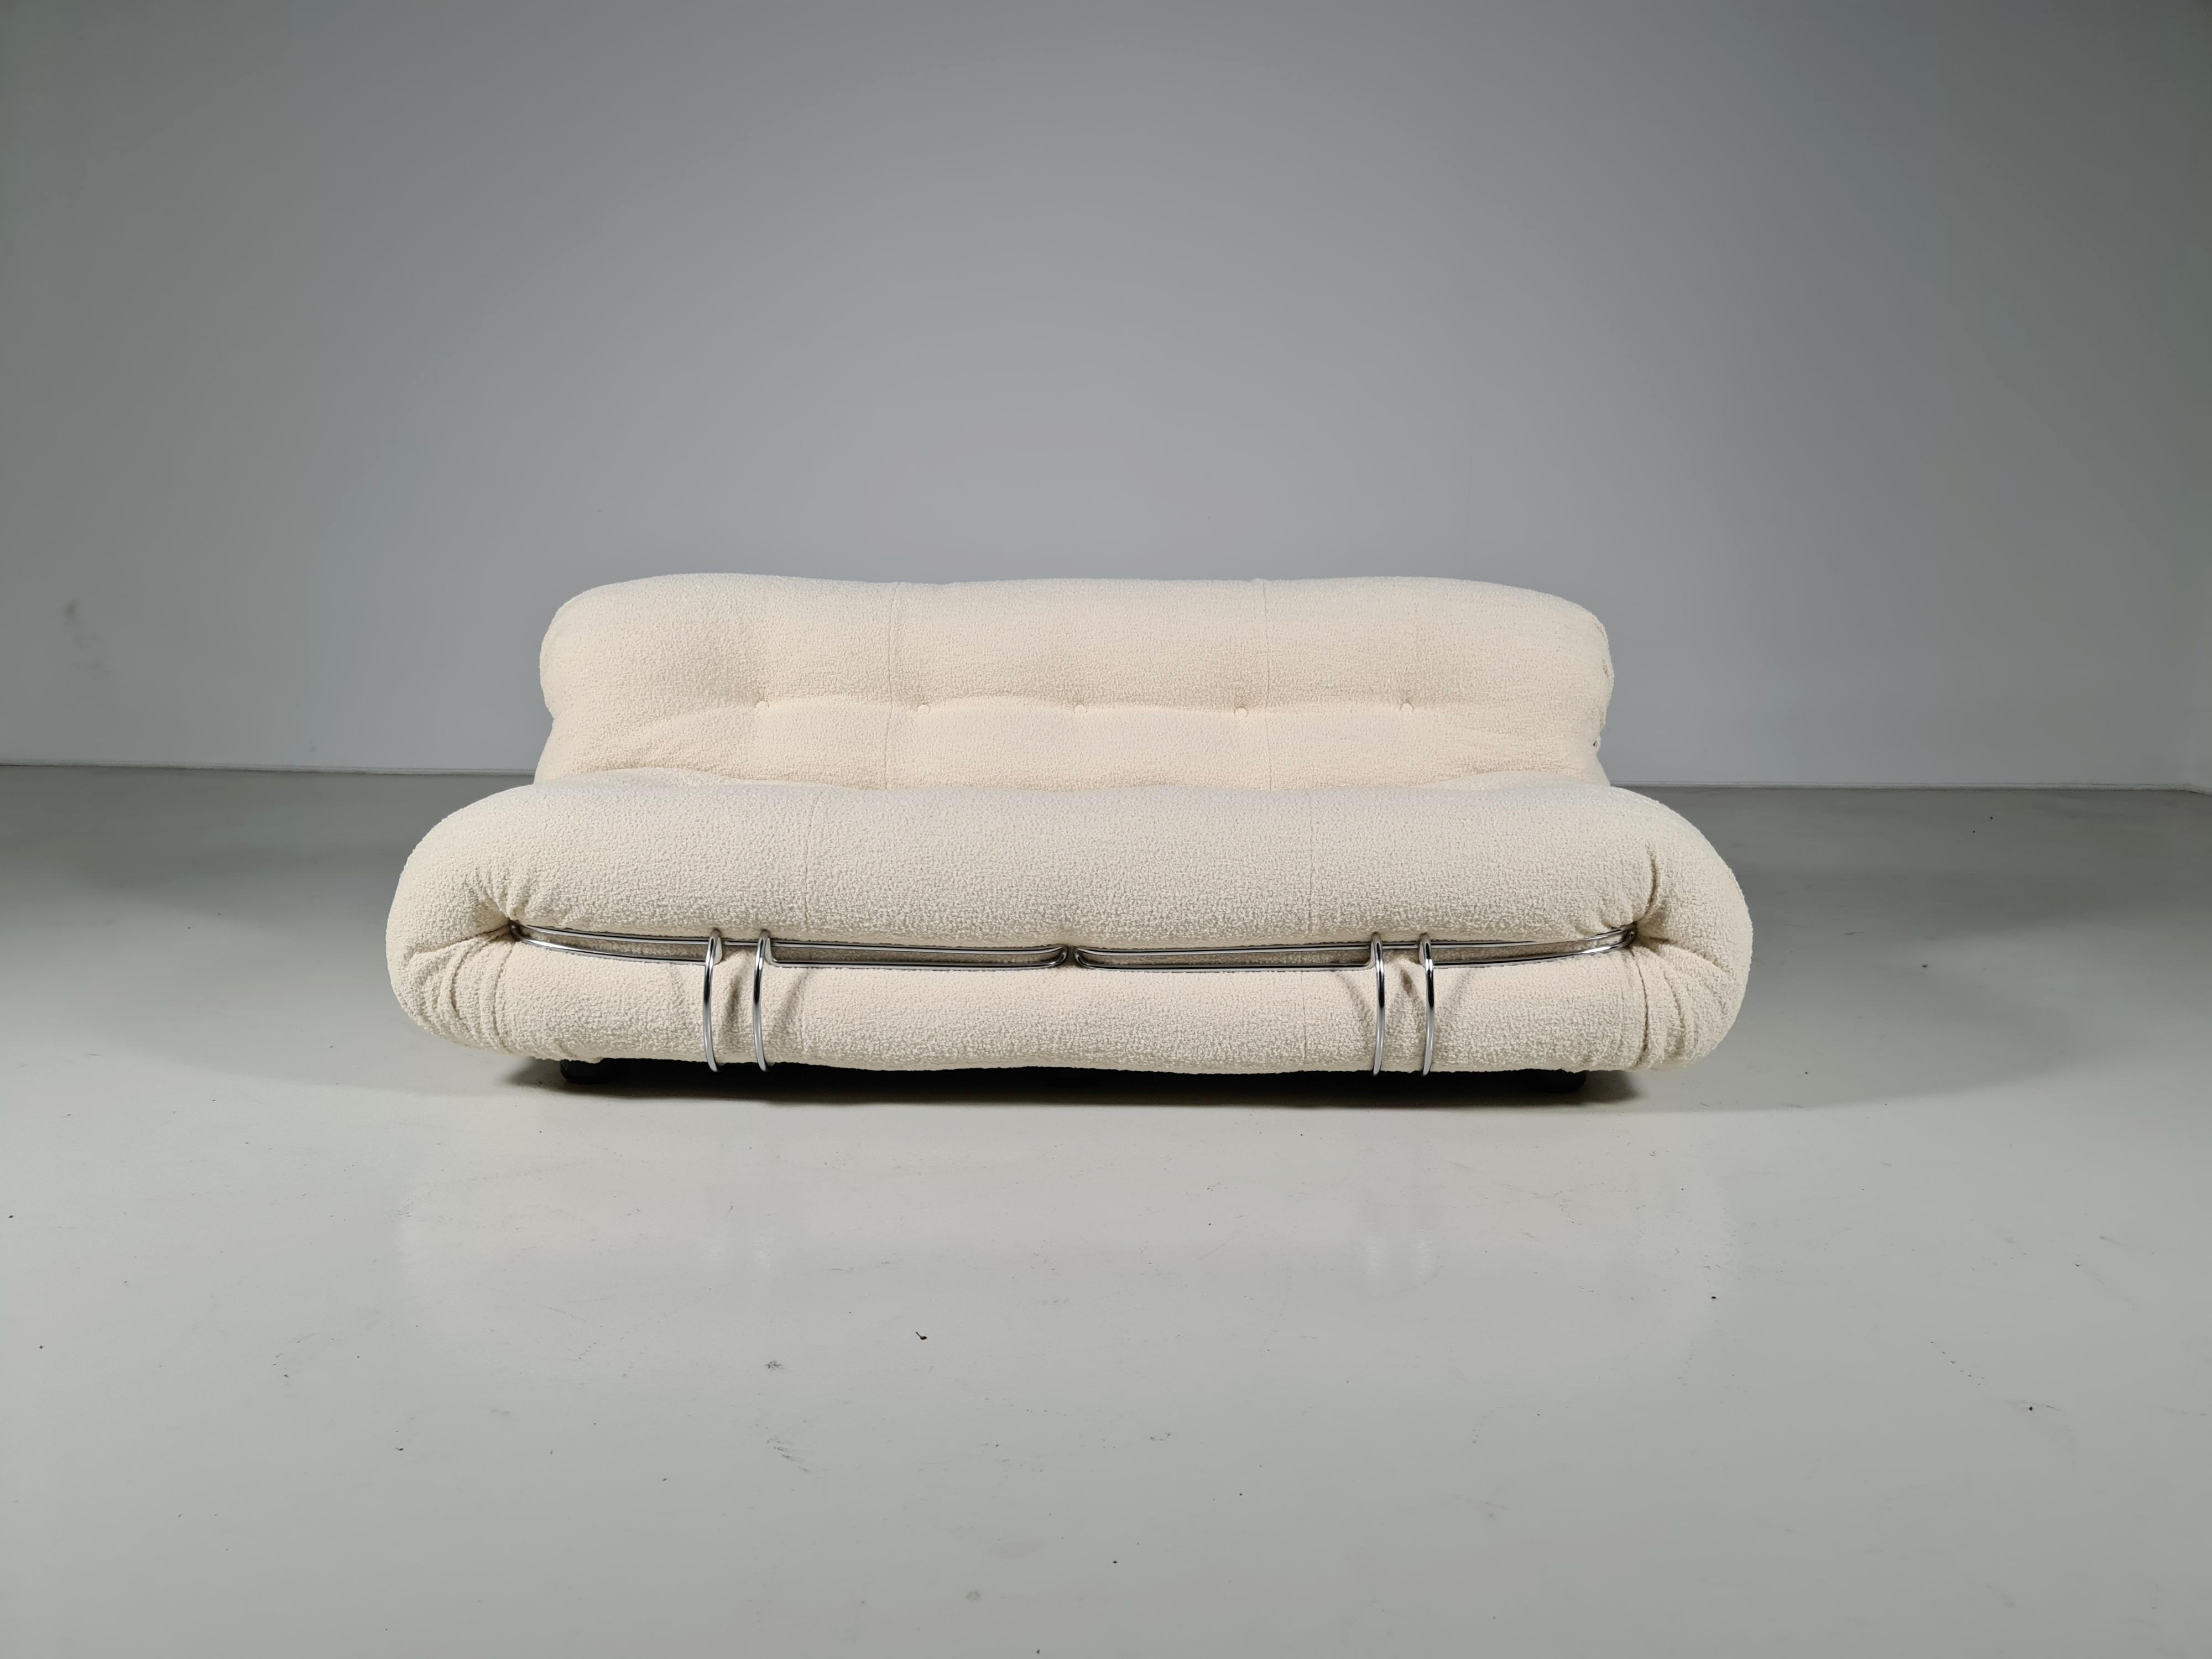 Soriana sofa by Afra & Tobia Scarpa for Cassina, Italy, 1970, The sofa is reupholstered in a beautiful boucle by Bisson Bruneel, giving it a very luxurious and residential appearance. The original foam is in perfect condition and shows it’s